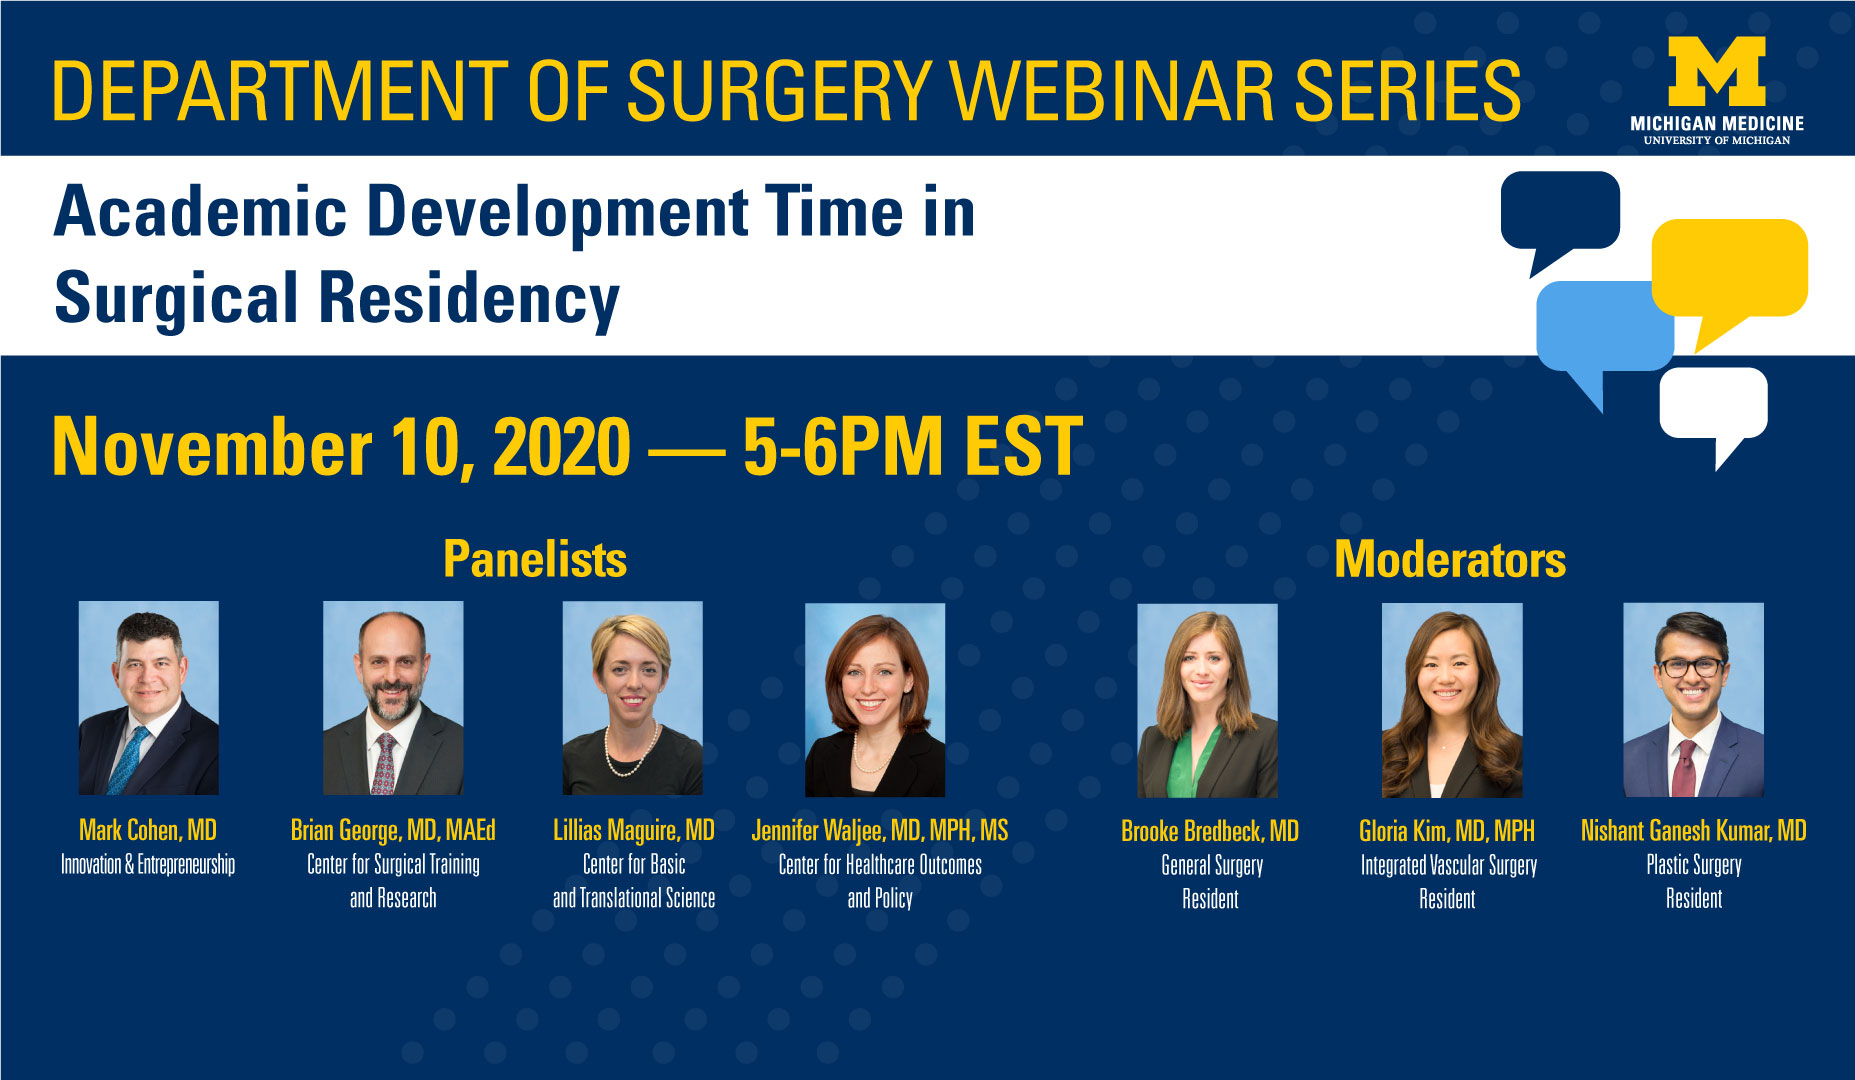 Department of Surgery Webinar Series November 10, 2020 from 5-6 PM (EST): Academic Development Time in Surgical Residency